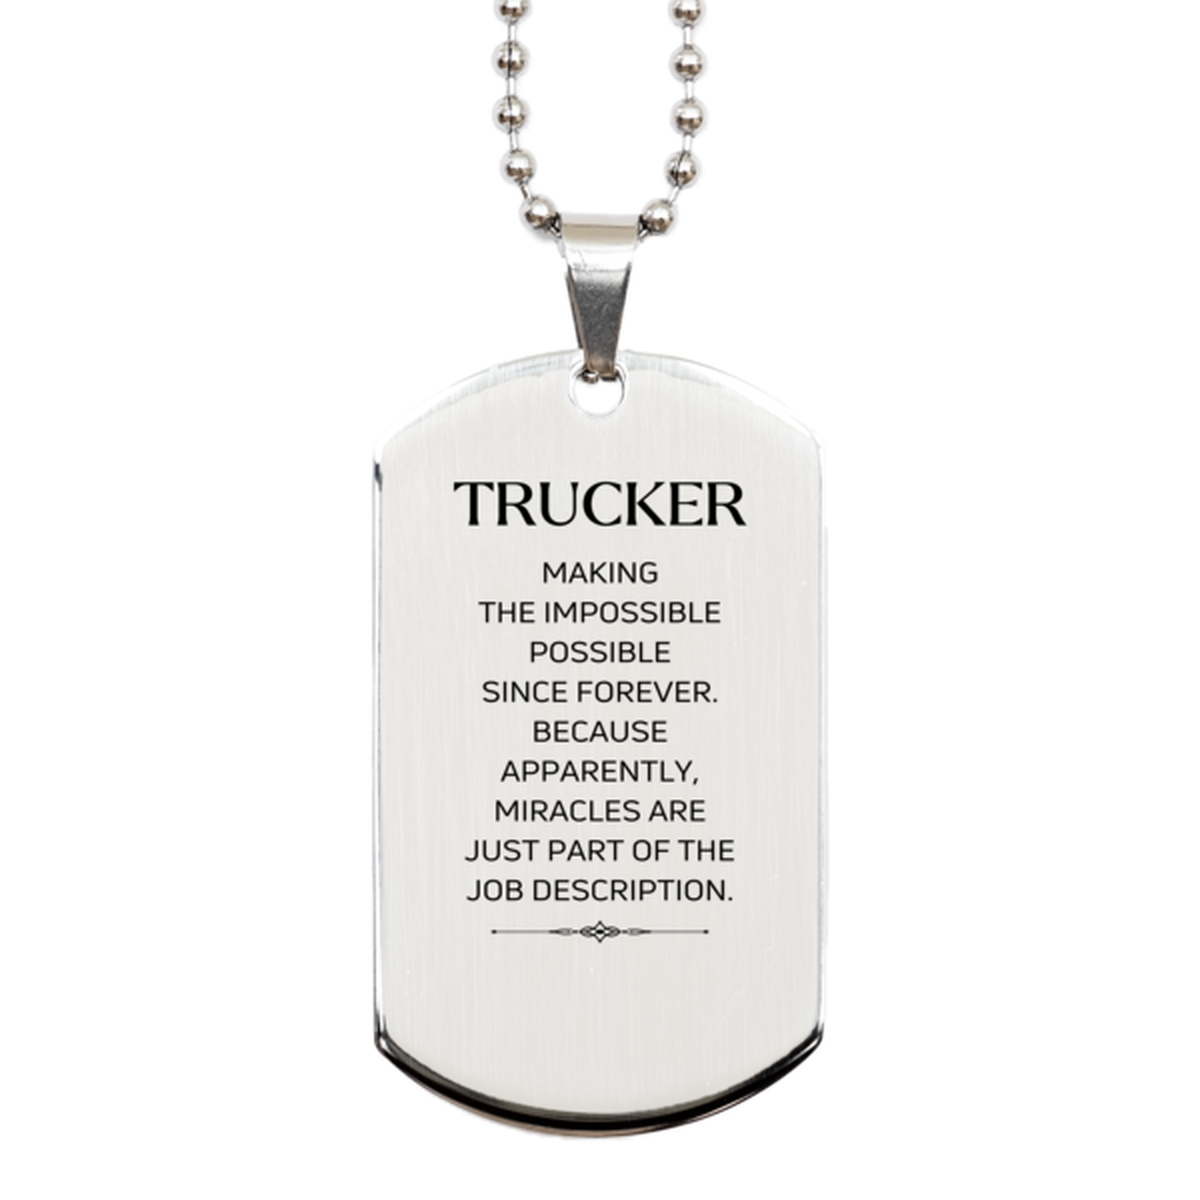 Funny Trucker Gifts, Miracles are just part of the job description, Inspirational Birthday Silver Dog Tag For Trucker, Men, Women, Coworkers, Friends, Boss